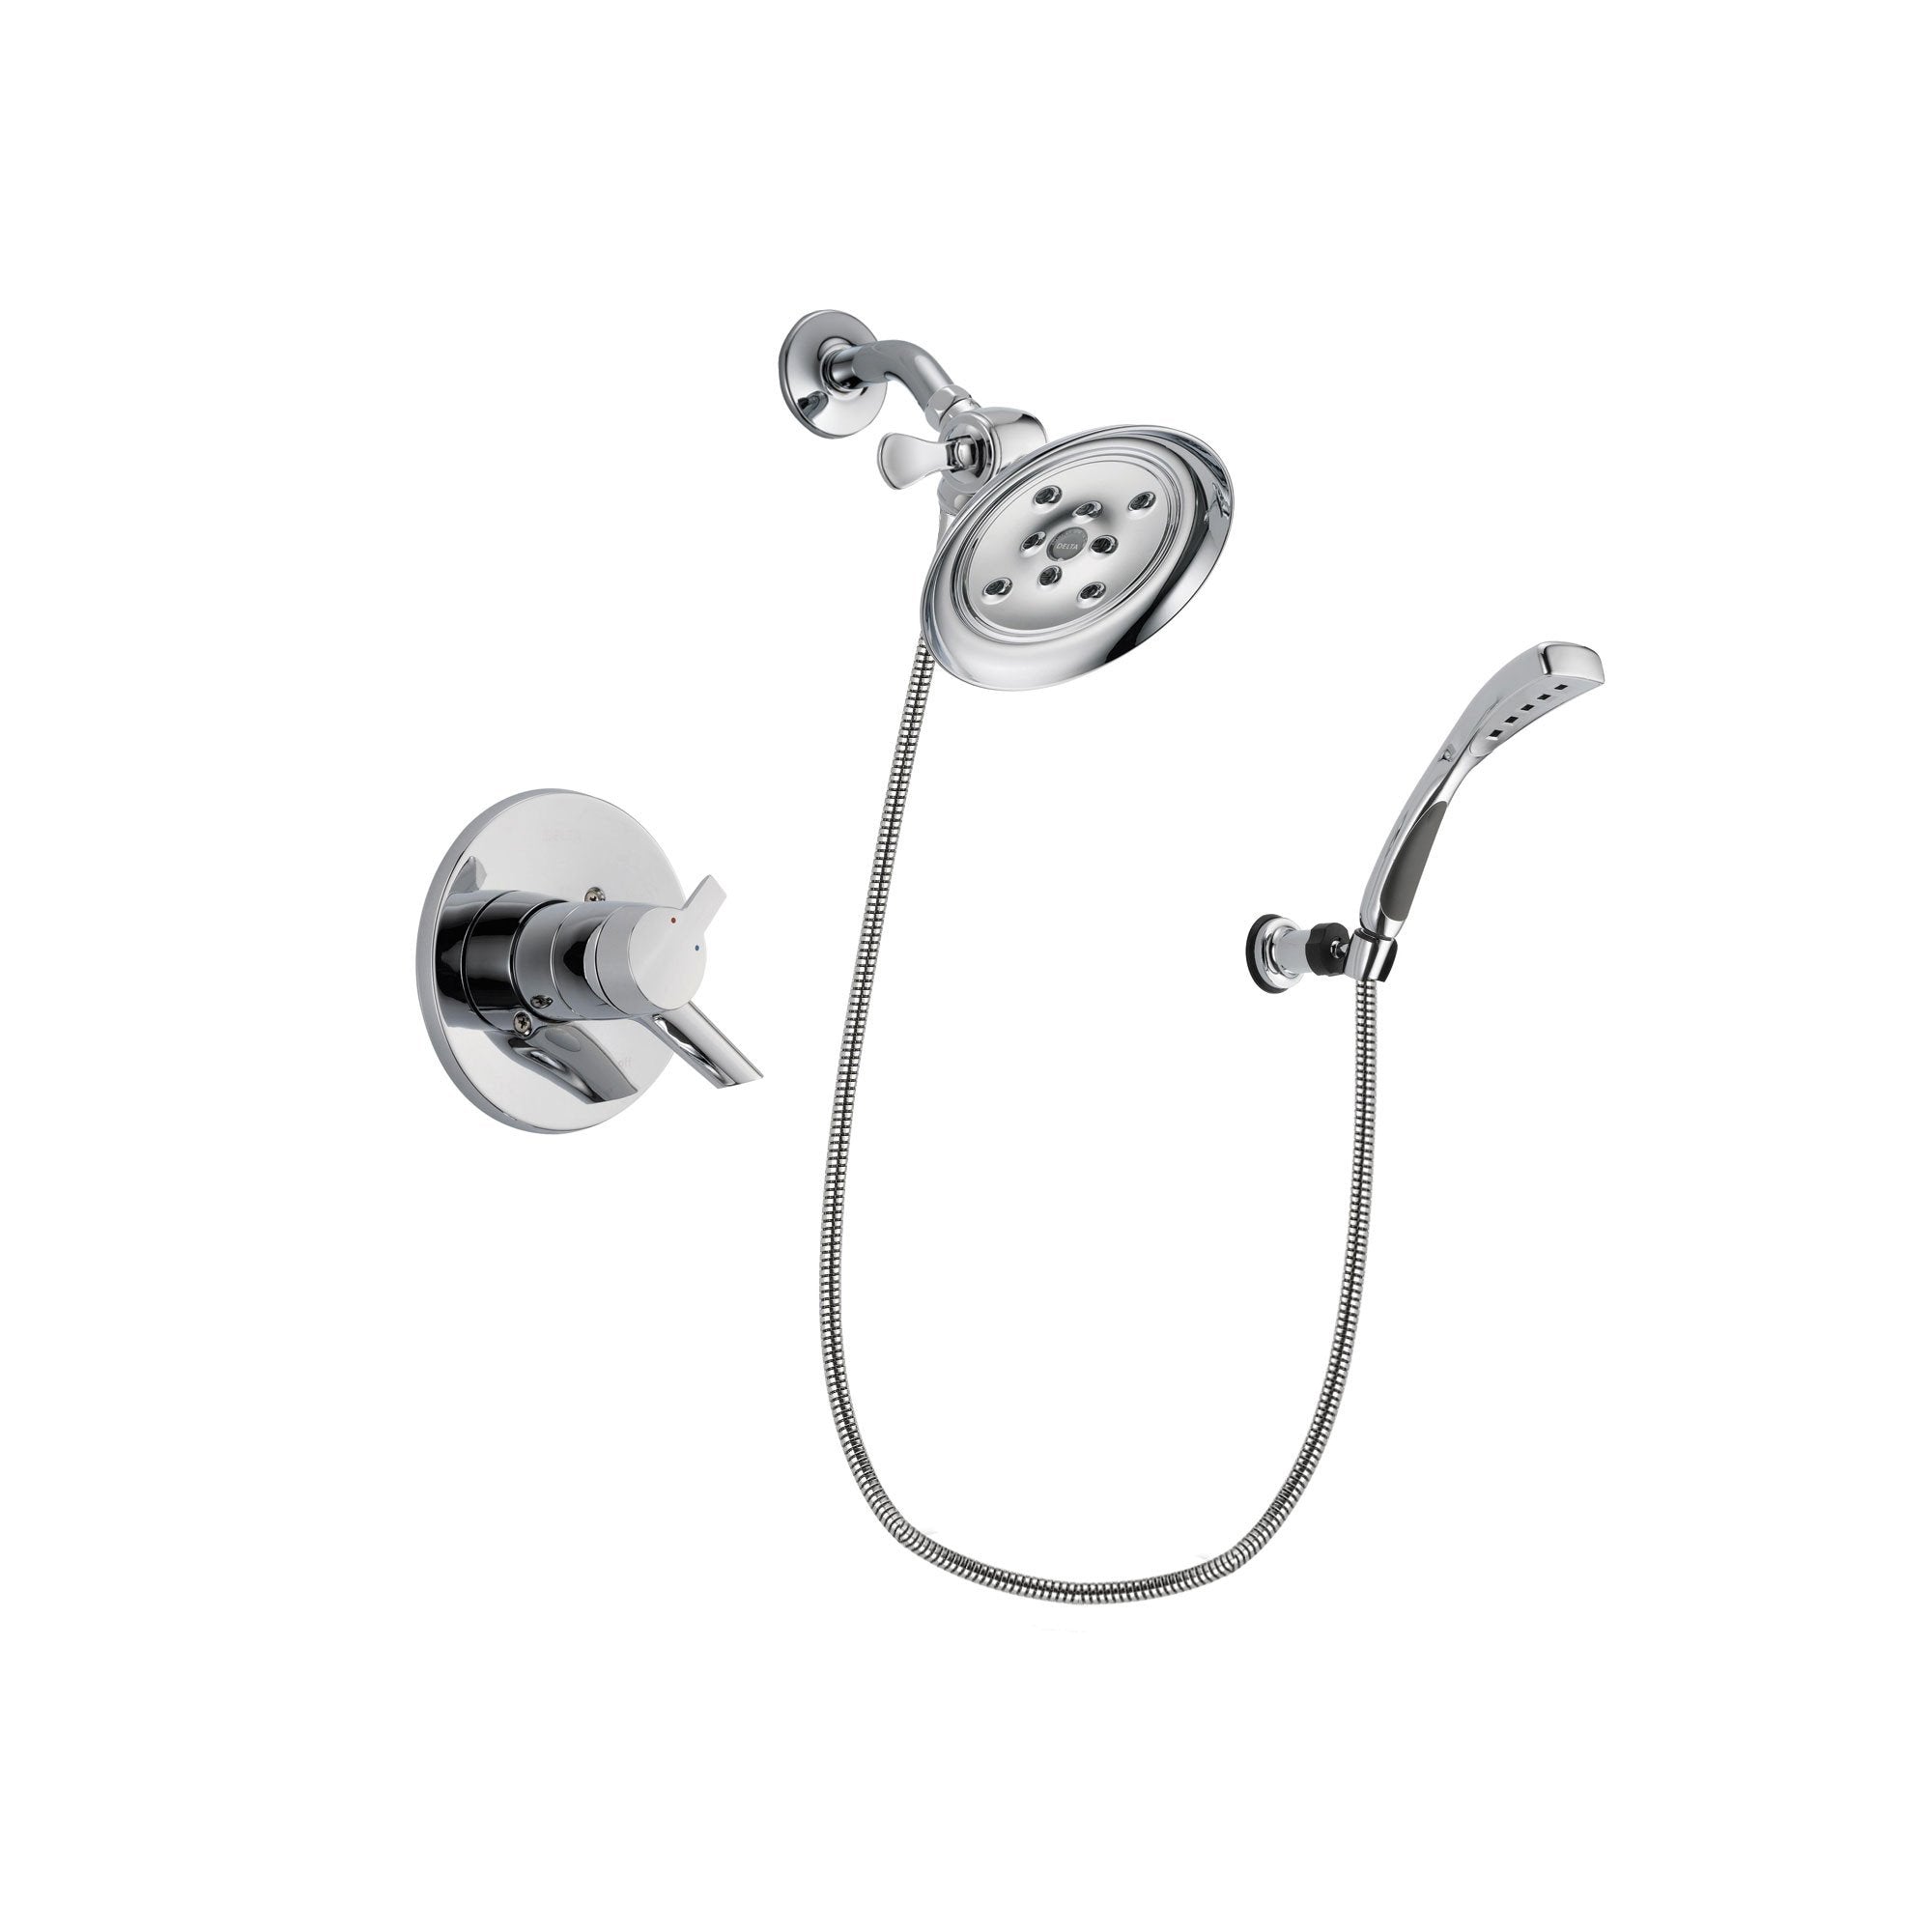 Delta Compel Chrome Finish Dual Control Shower Faucet System Package with Large Rain Showerhead and Wall-Mount Bracket with Handheld Shower Spray Includes Rough-in Valve DSP1062V